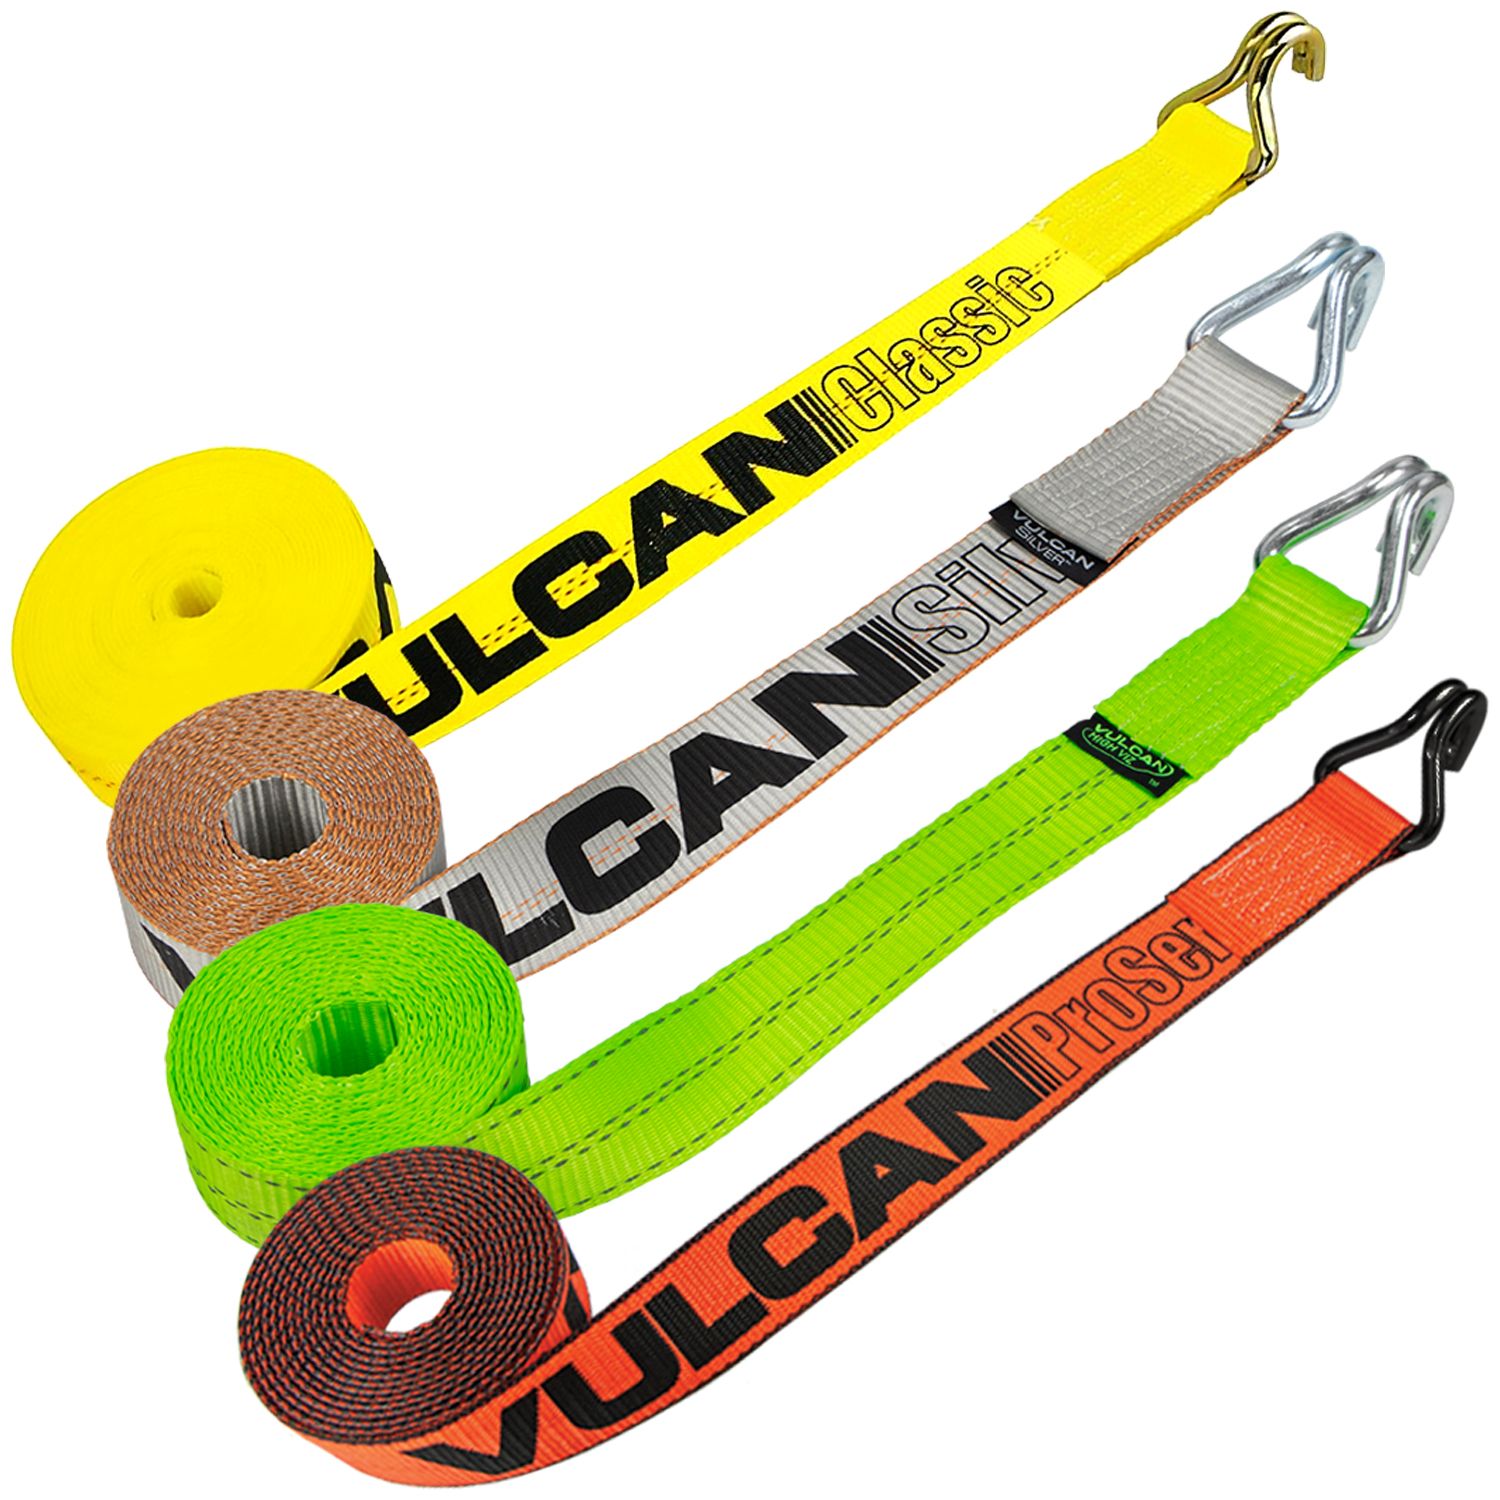 VULCAN Winch Strap with Twisted Snap Hook - 2 Inch x 15 Foot, 4 Pack - 3,300 Pound Safe Working Load